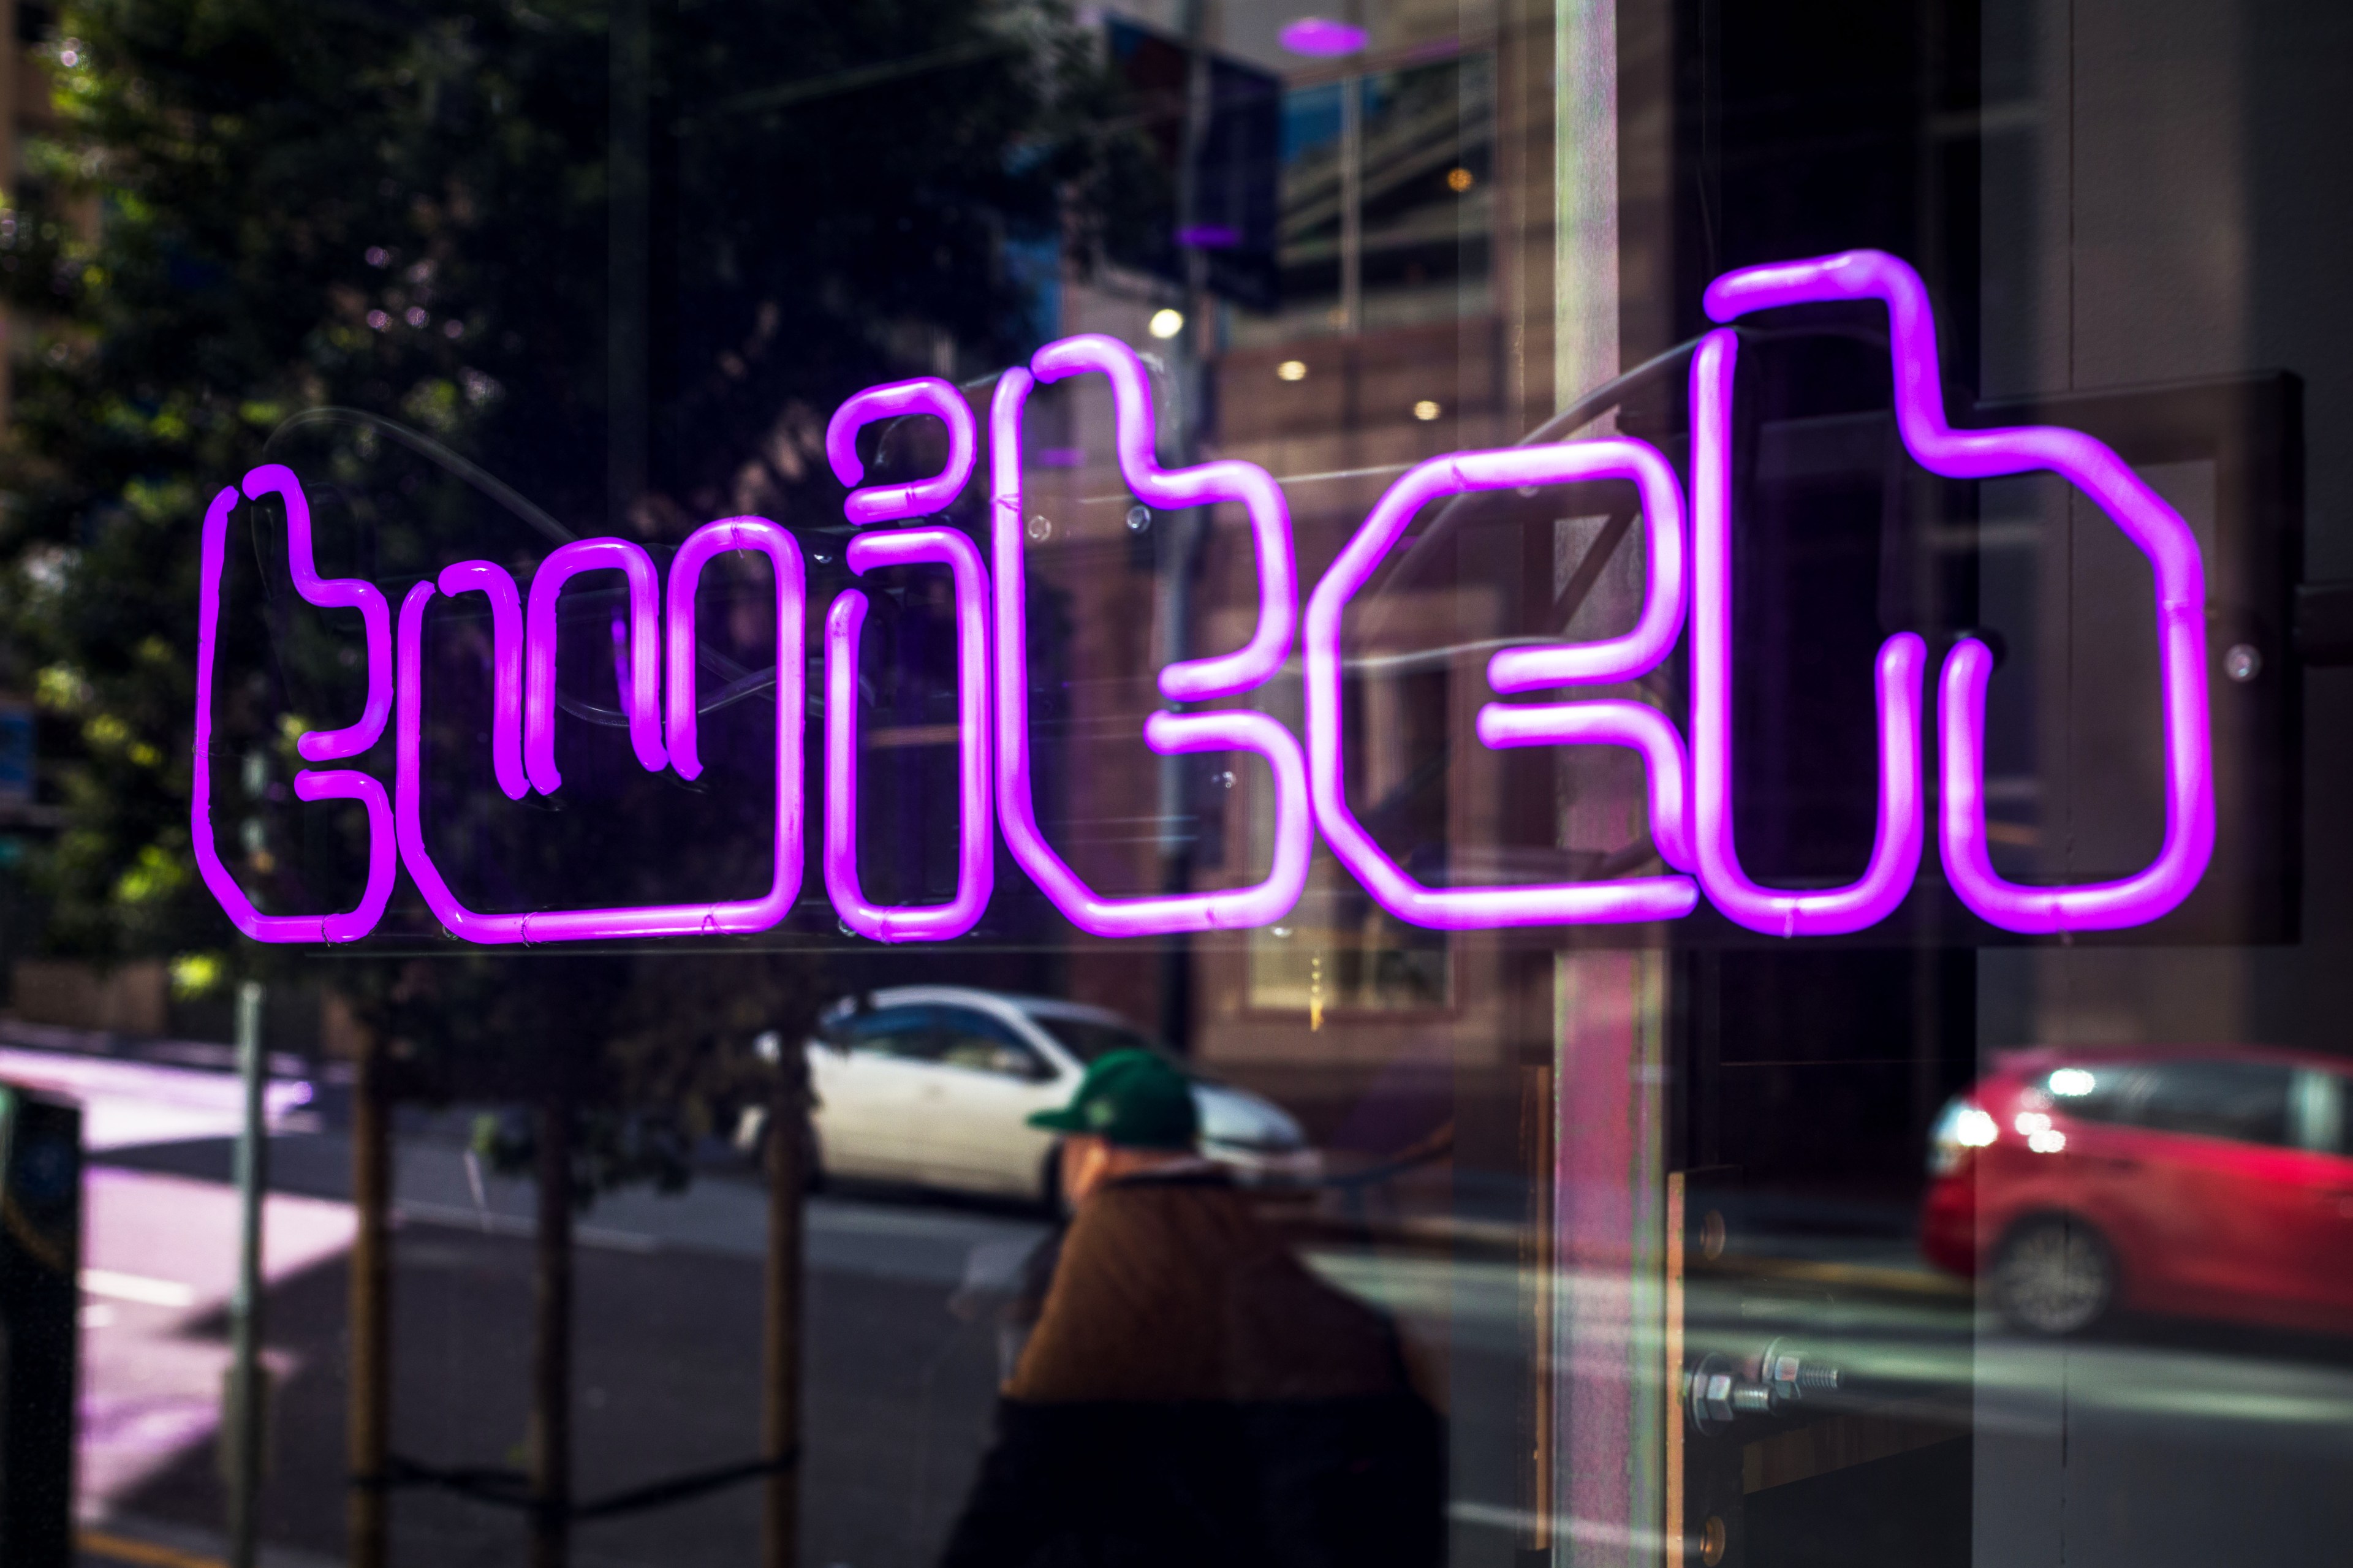 A neon sign with mirror-image text against a window, reflecting street life with moving cars and a pedestrian.